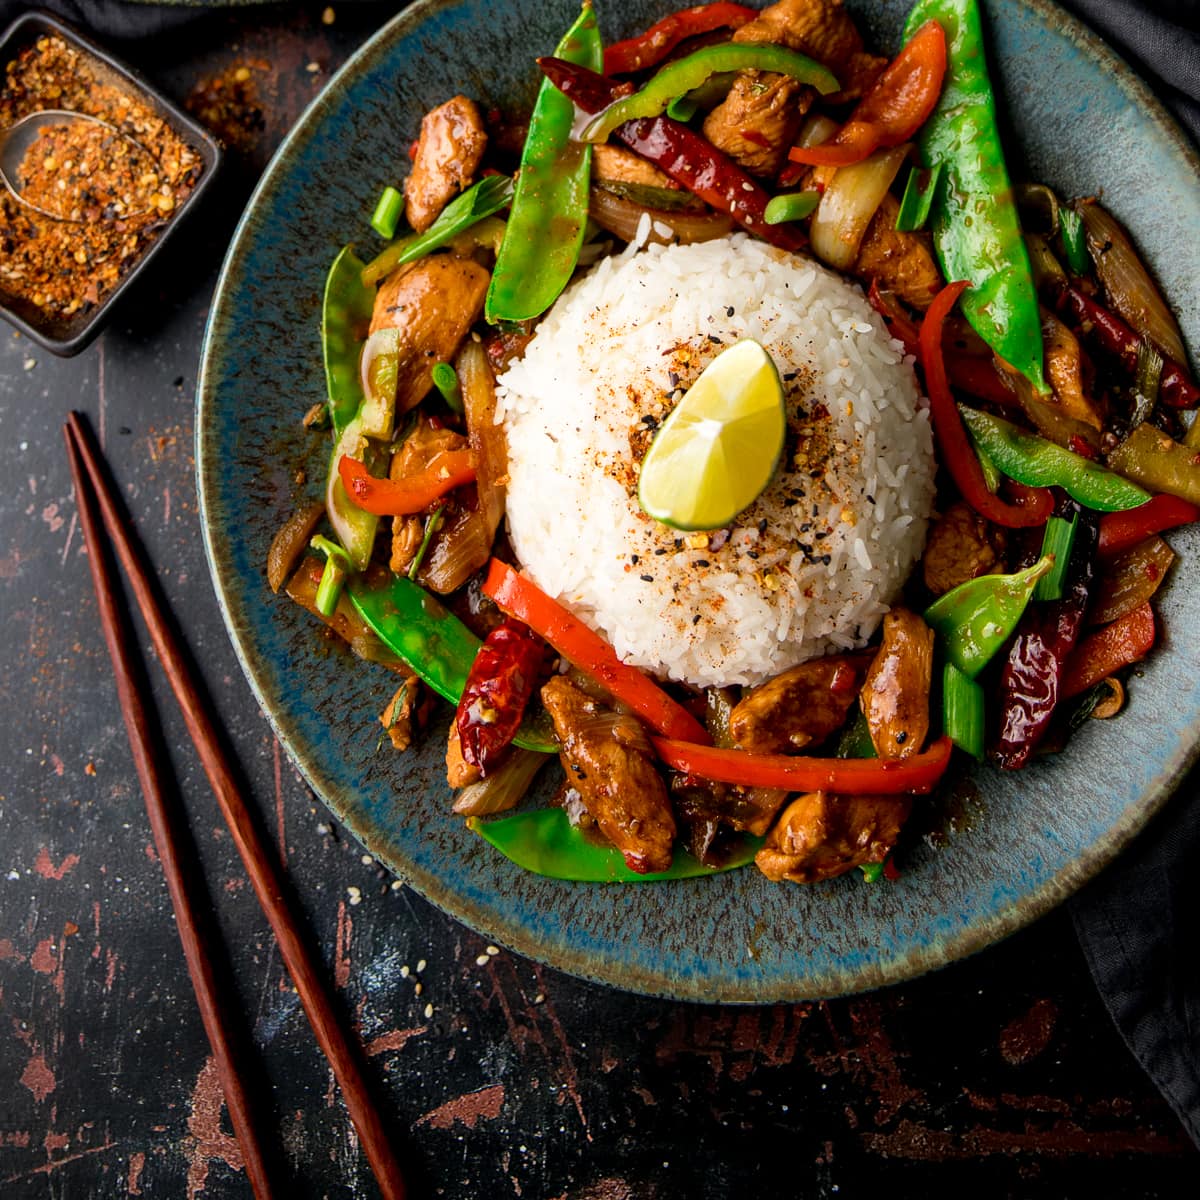 Case study image for Wagamama PPC